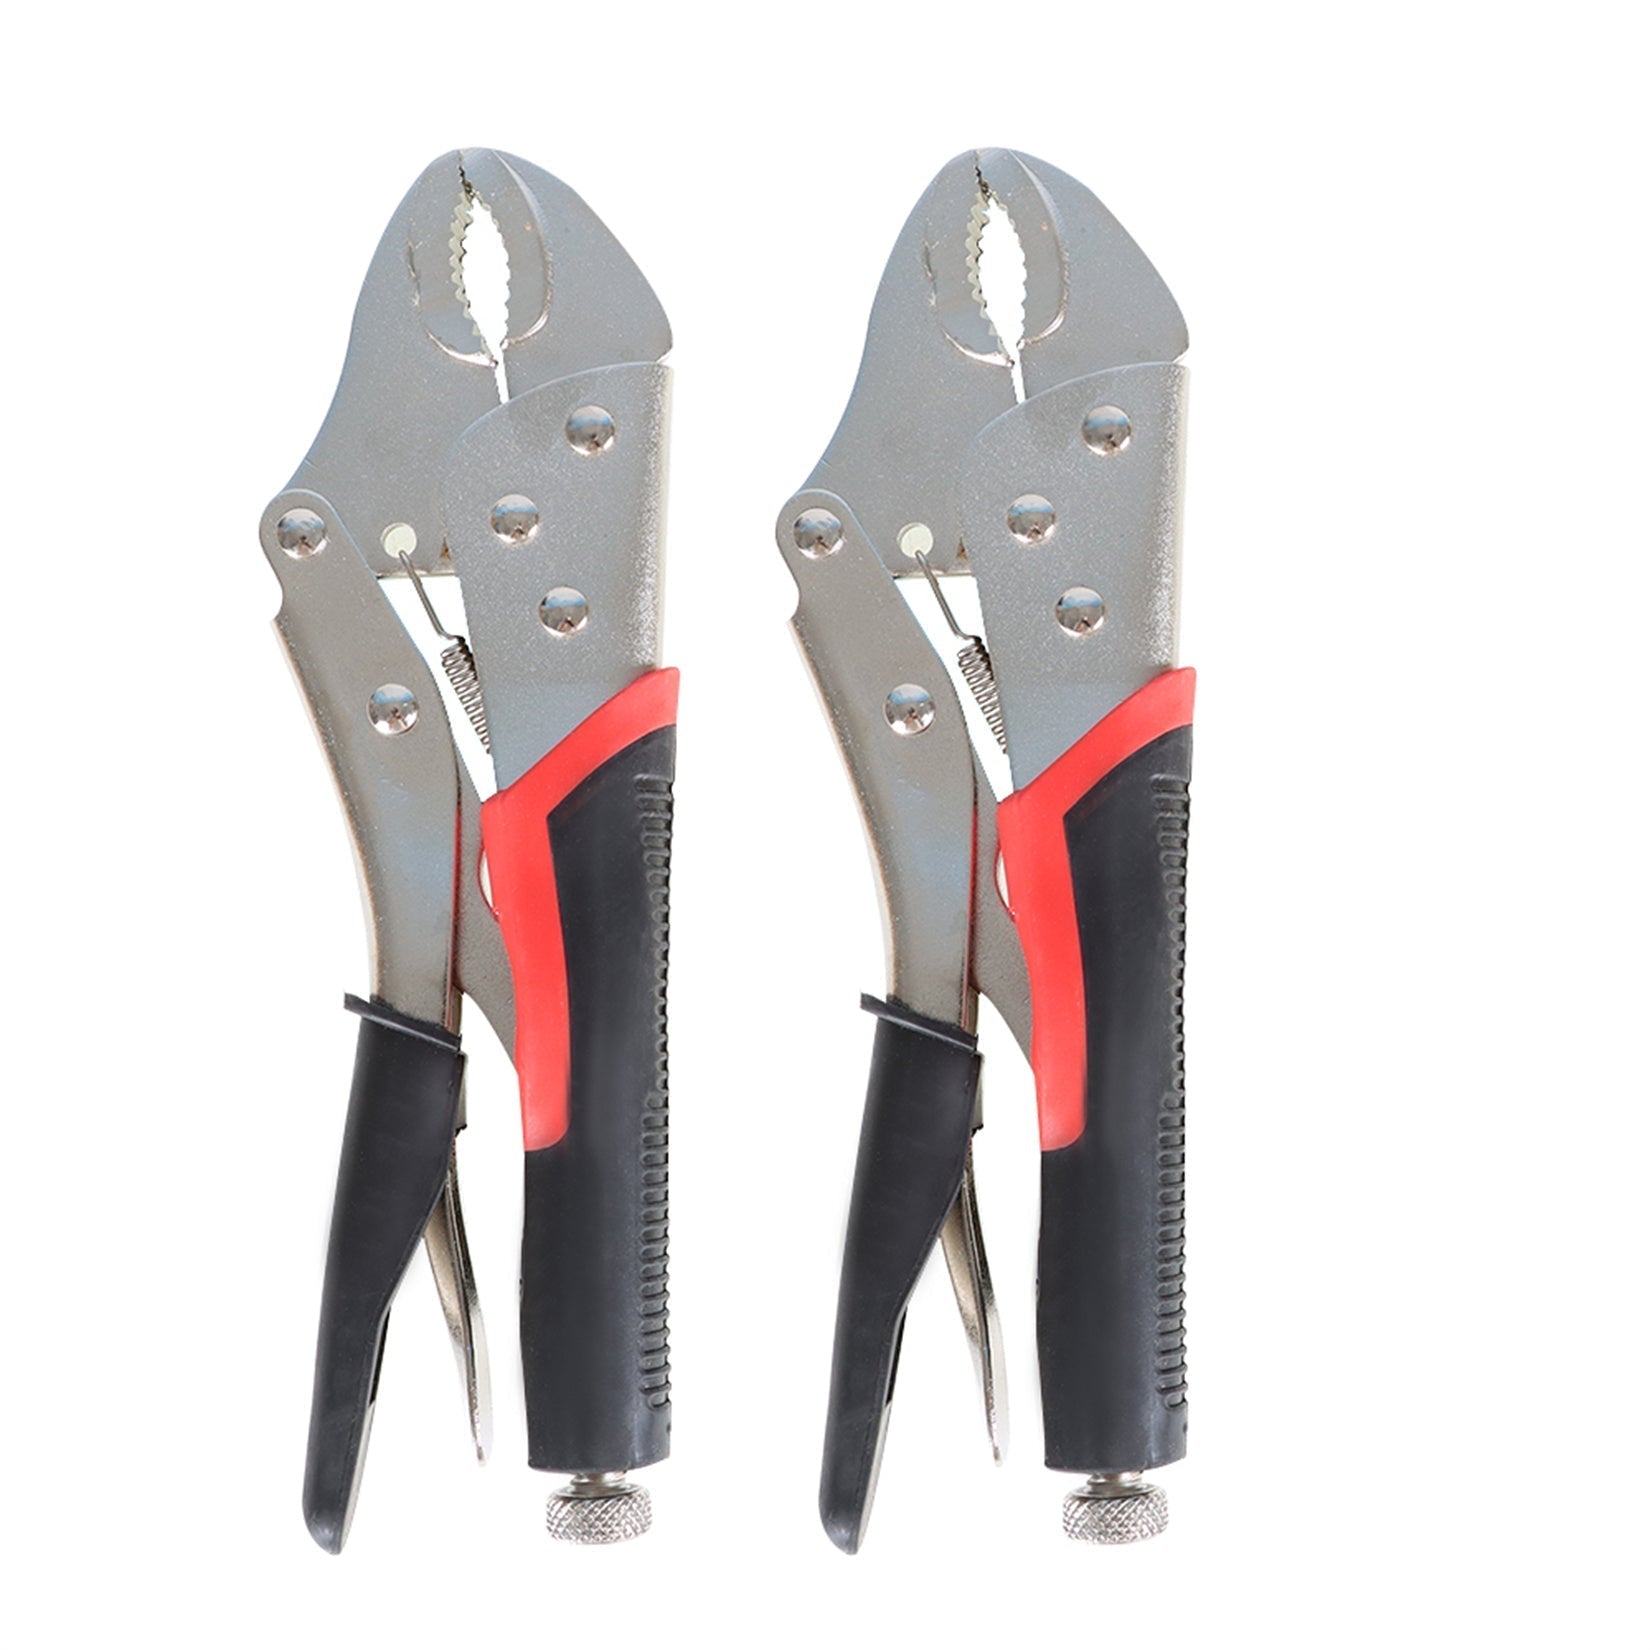 findmall  2Pcs 10 Inch Torque Lock Curved Jaw Locking Plier Set Chrome-vanadium Steel Fast Setup Easy Release for Home Shop Workshop and Automotive Use FINDMALLPARTS